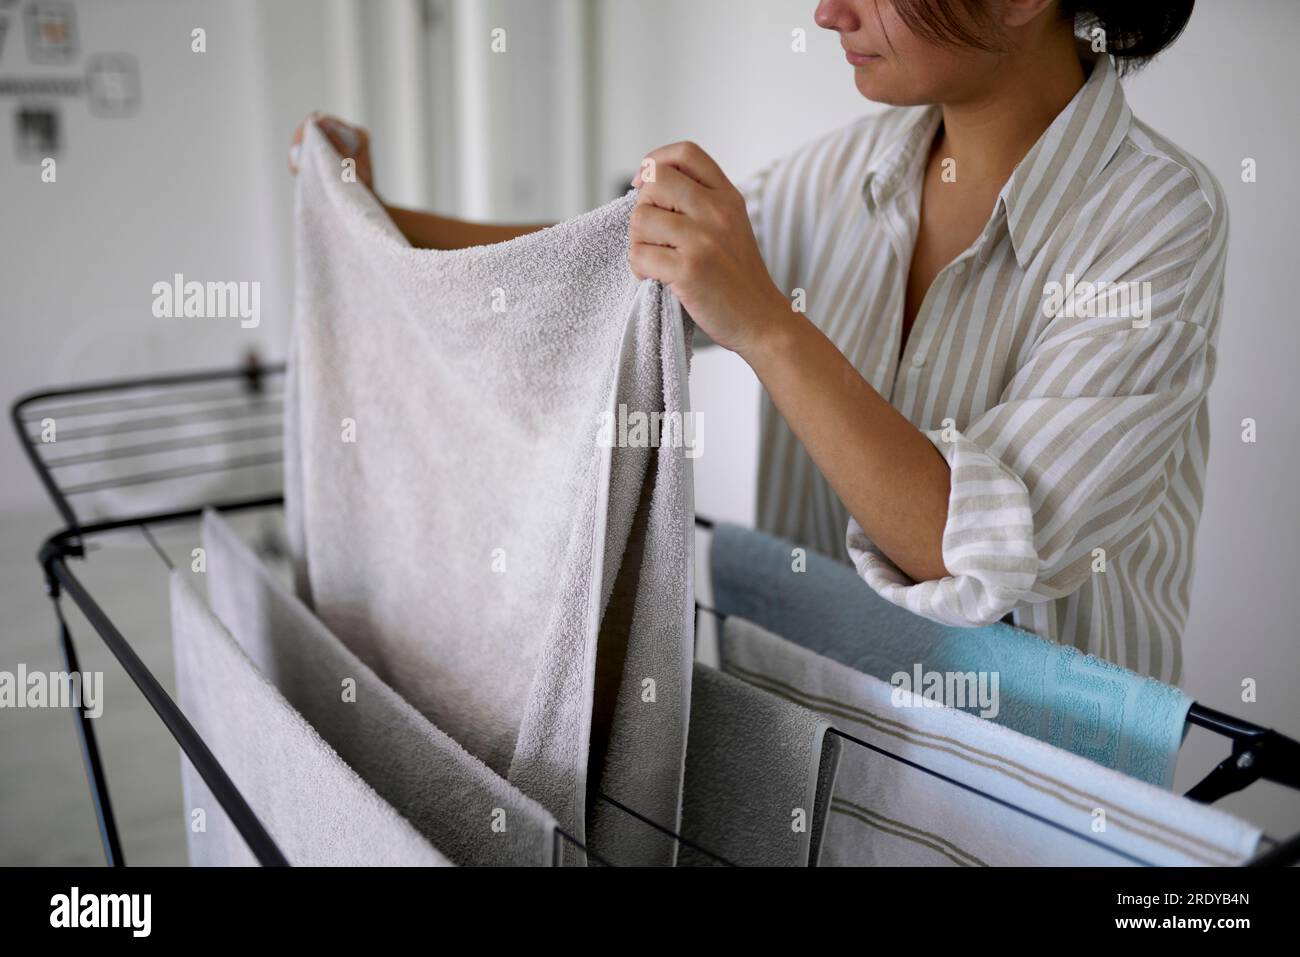 Woman removing dried clothes from rack Stock Photo